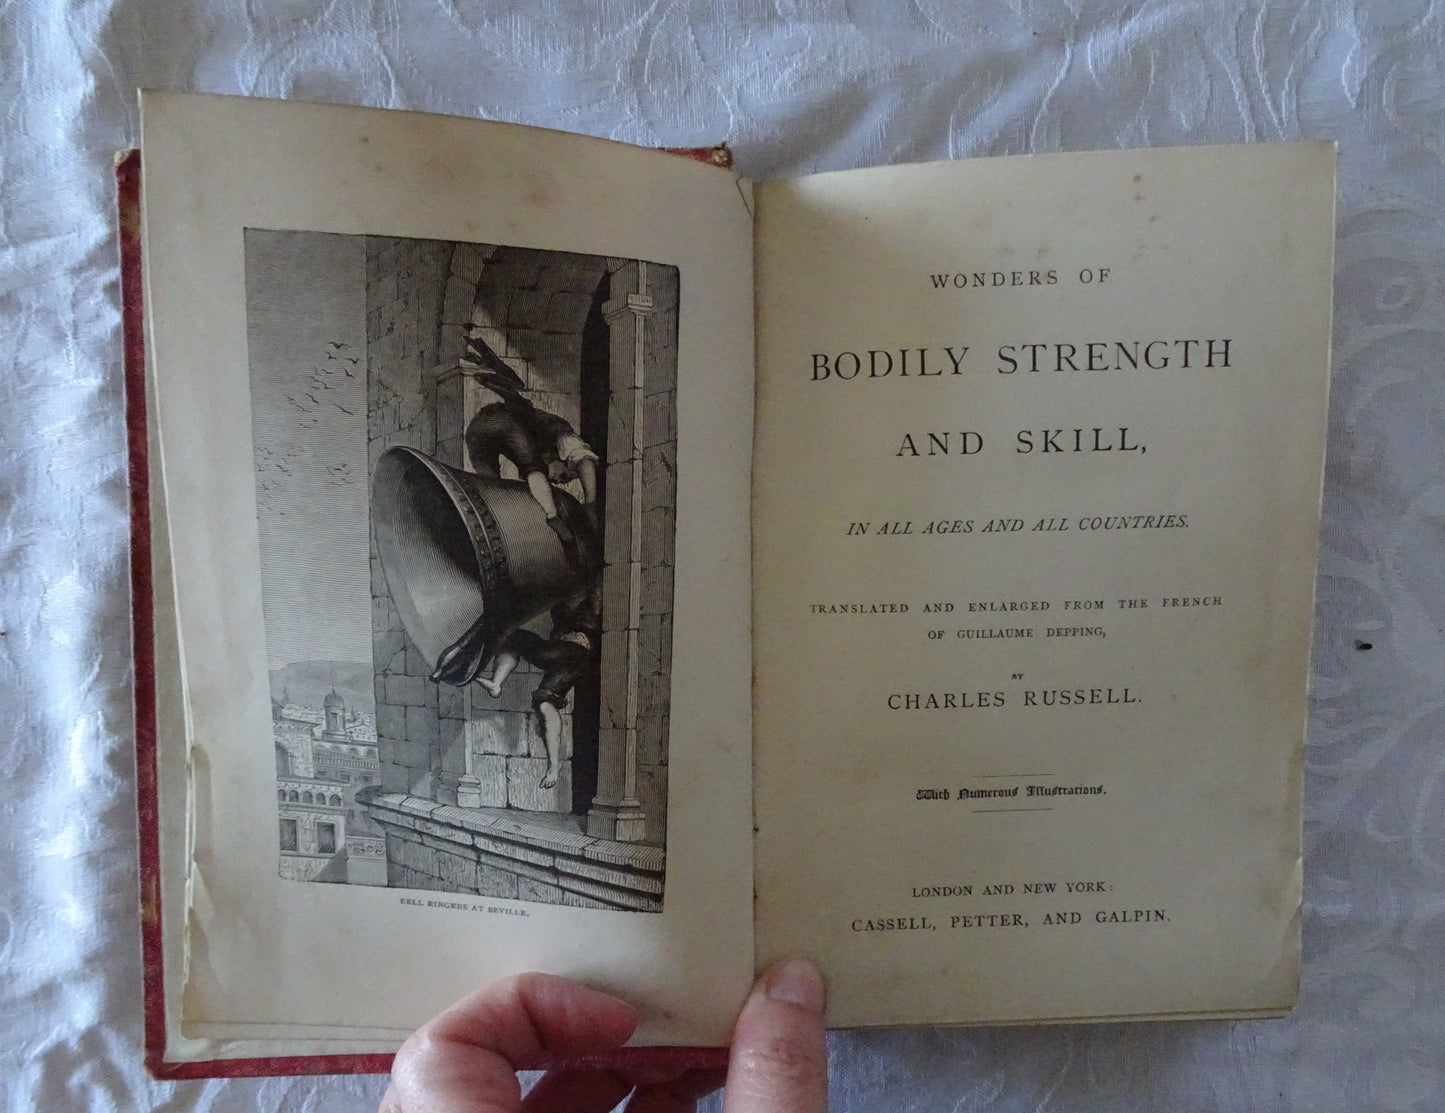 Wonders of Bodily Strength and Skill by Charles Russell